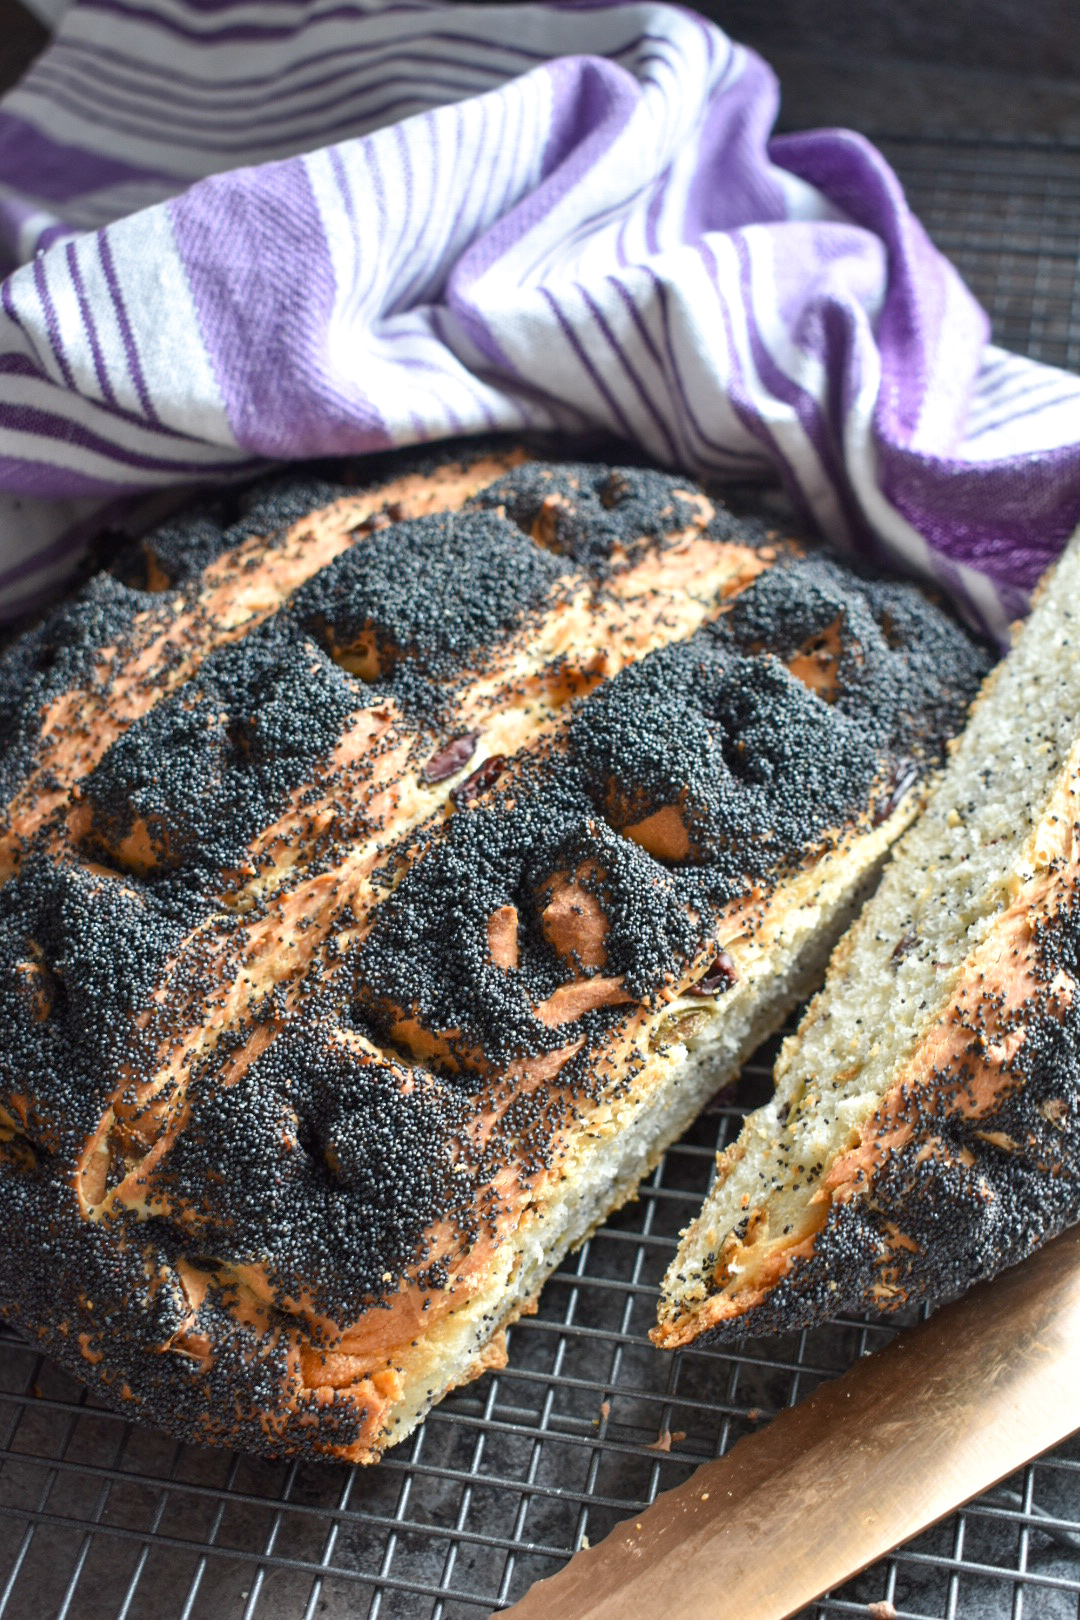 Loaf of bread covered in poppy seeds